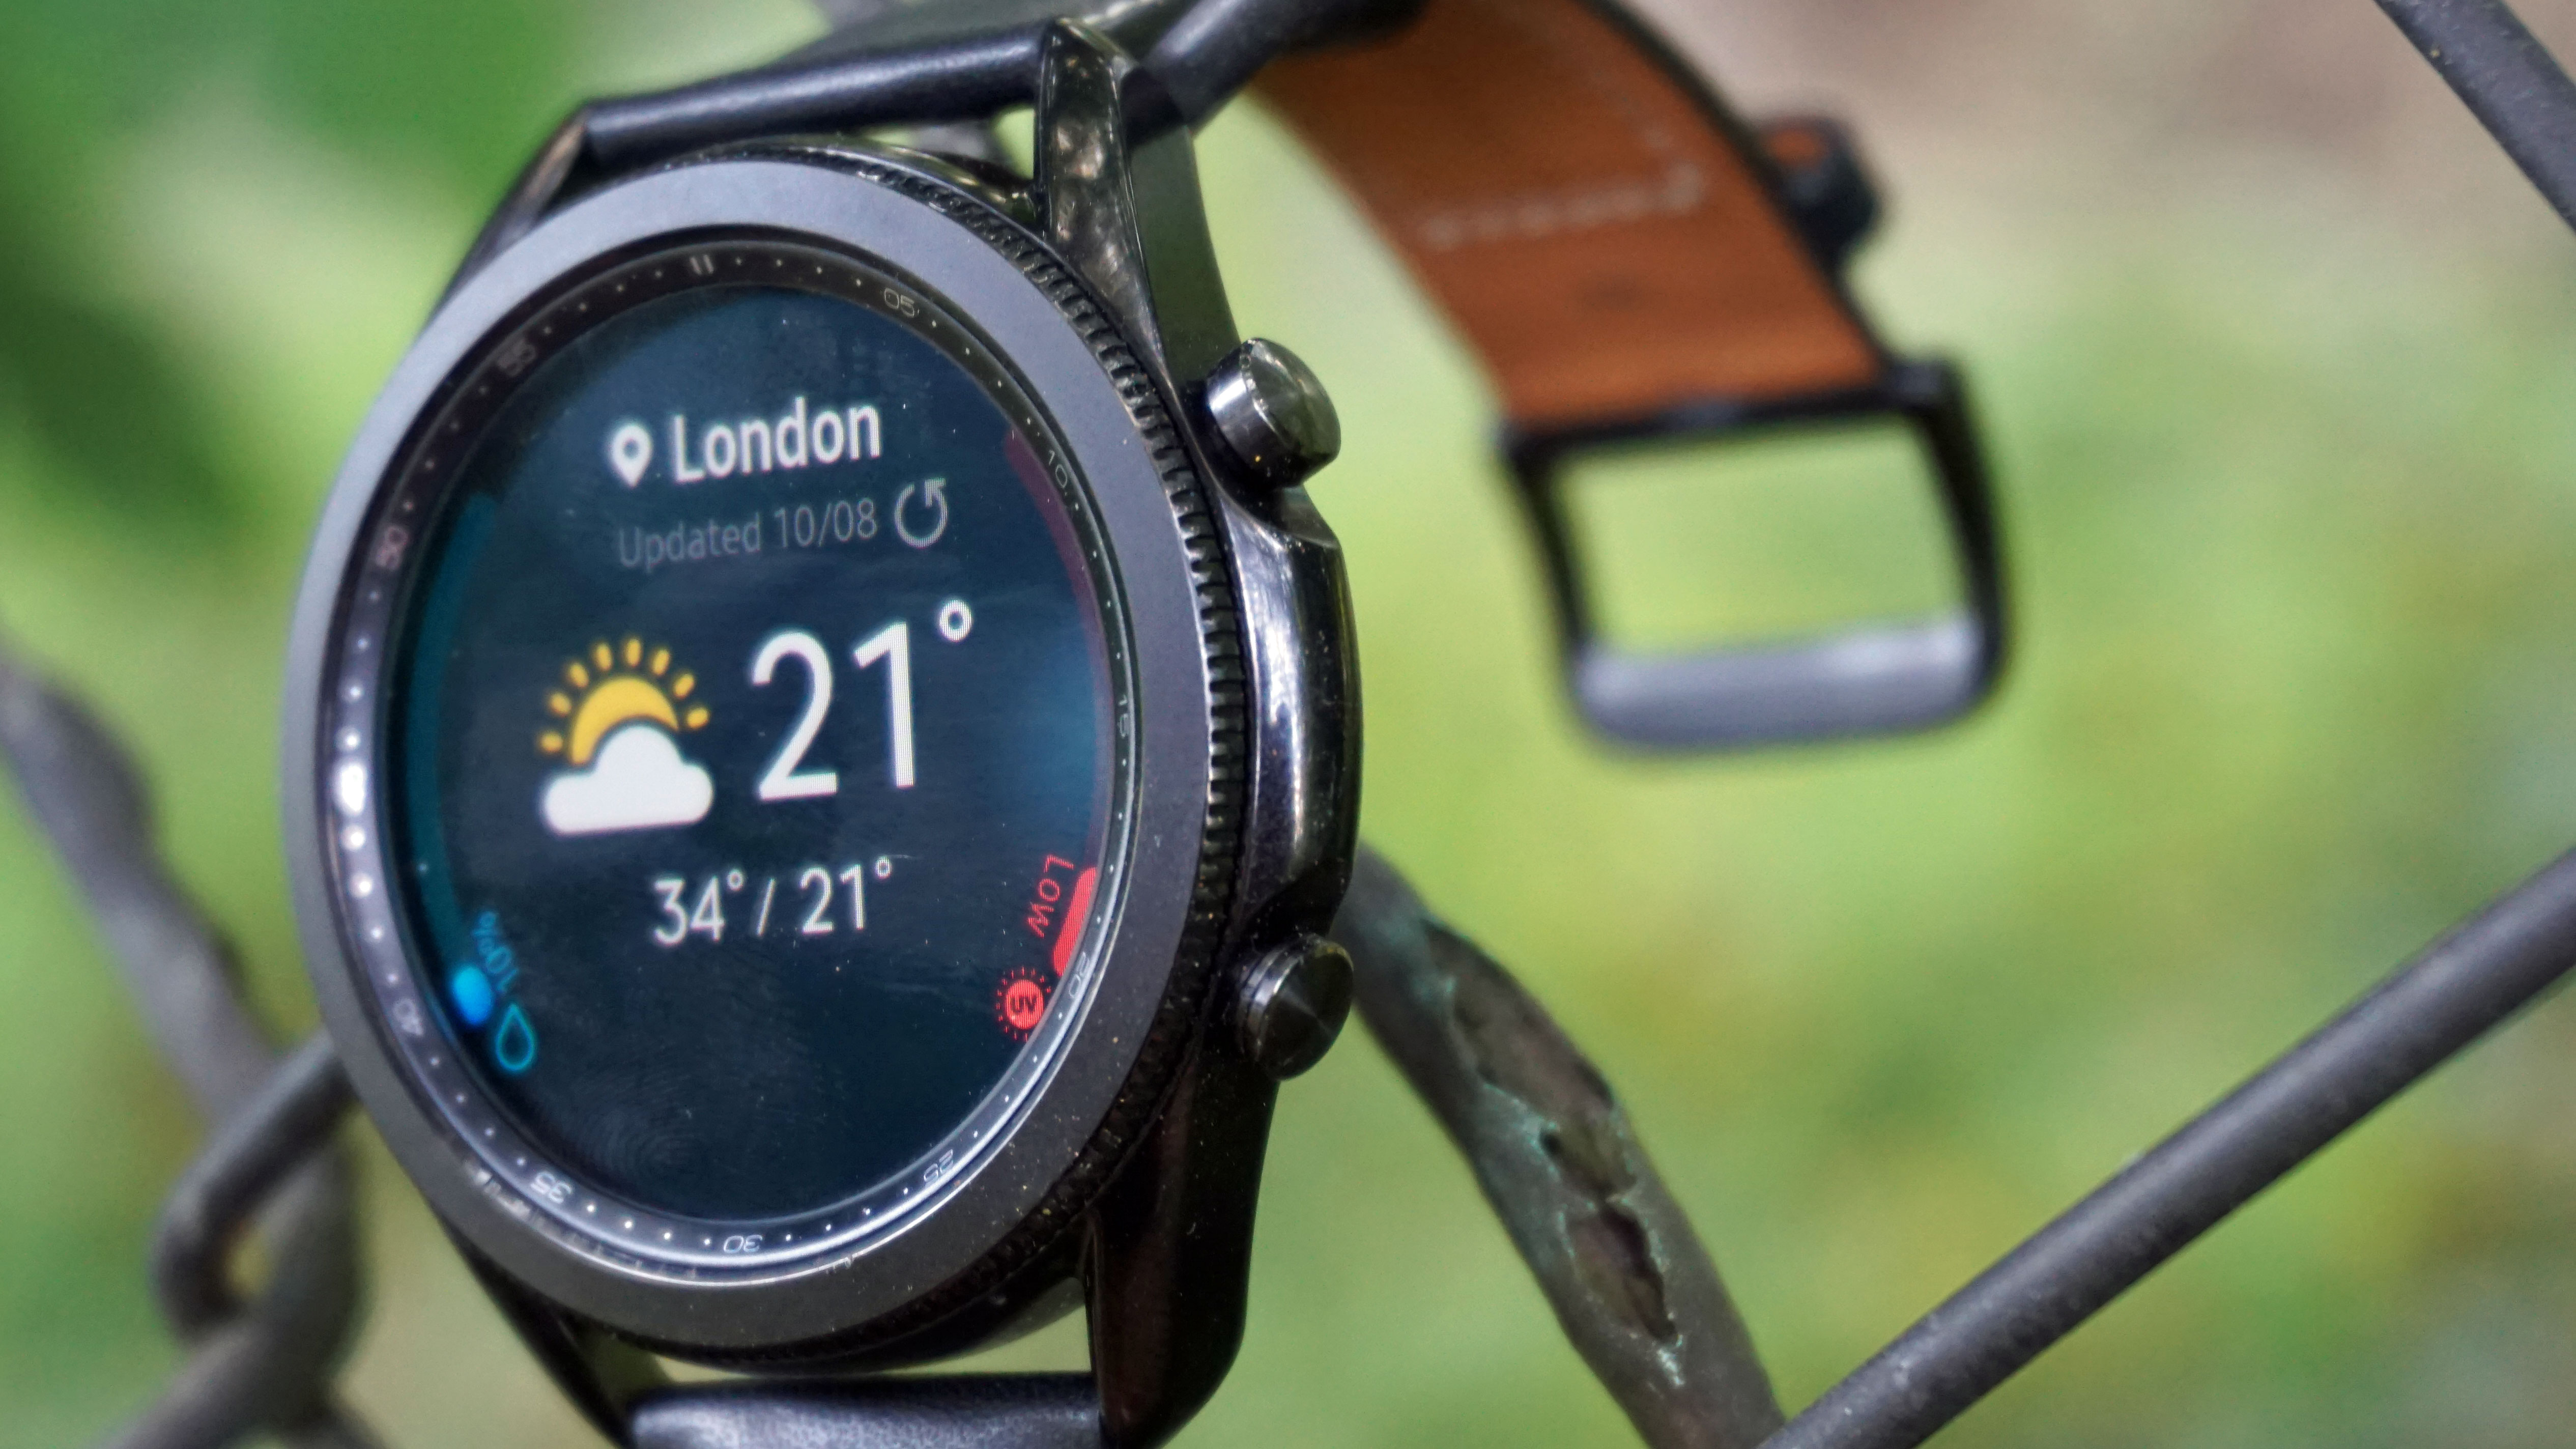 Samsung Galaxy Watch 3 Review Samsung Galaxy Watch 3 By Electronic Partners 13 August 2020